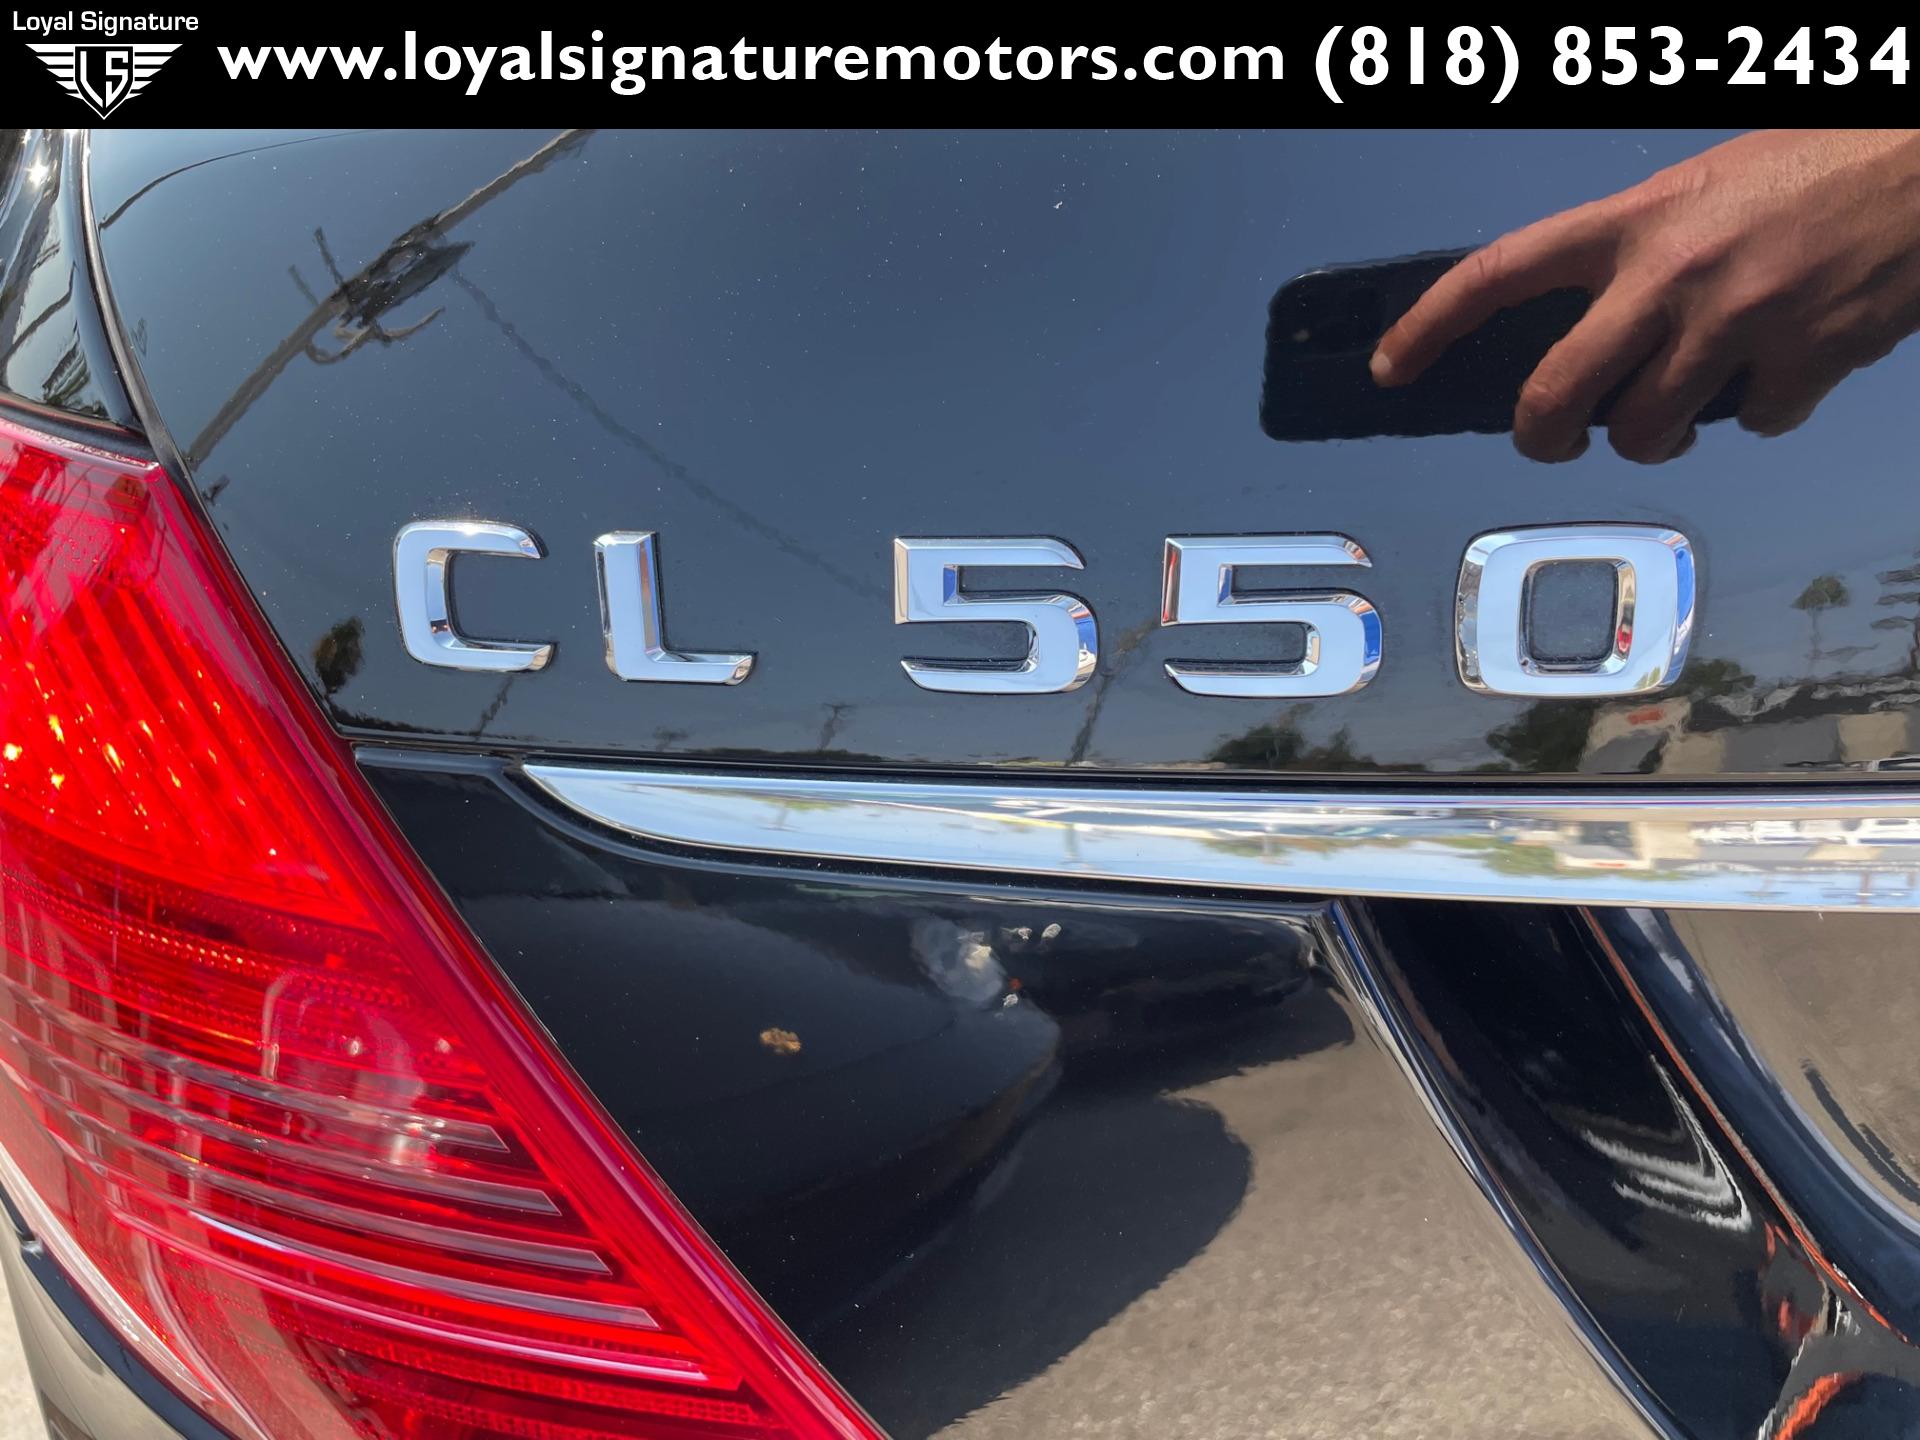 Used-2007-Mercedes-Benz-CL-Class-CL-550